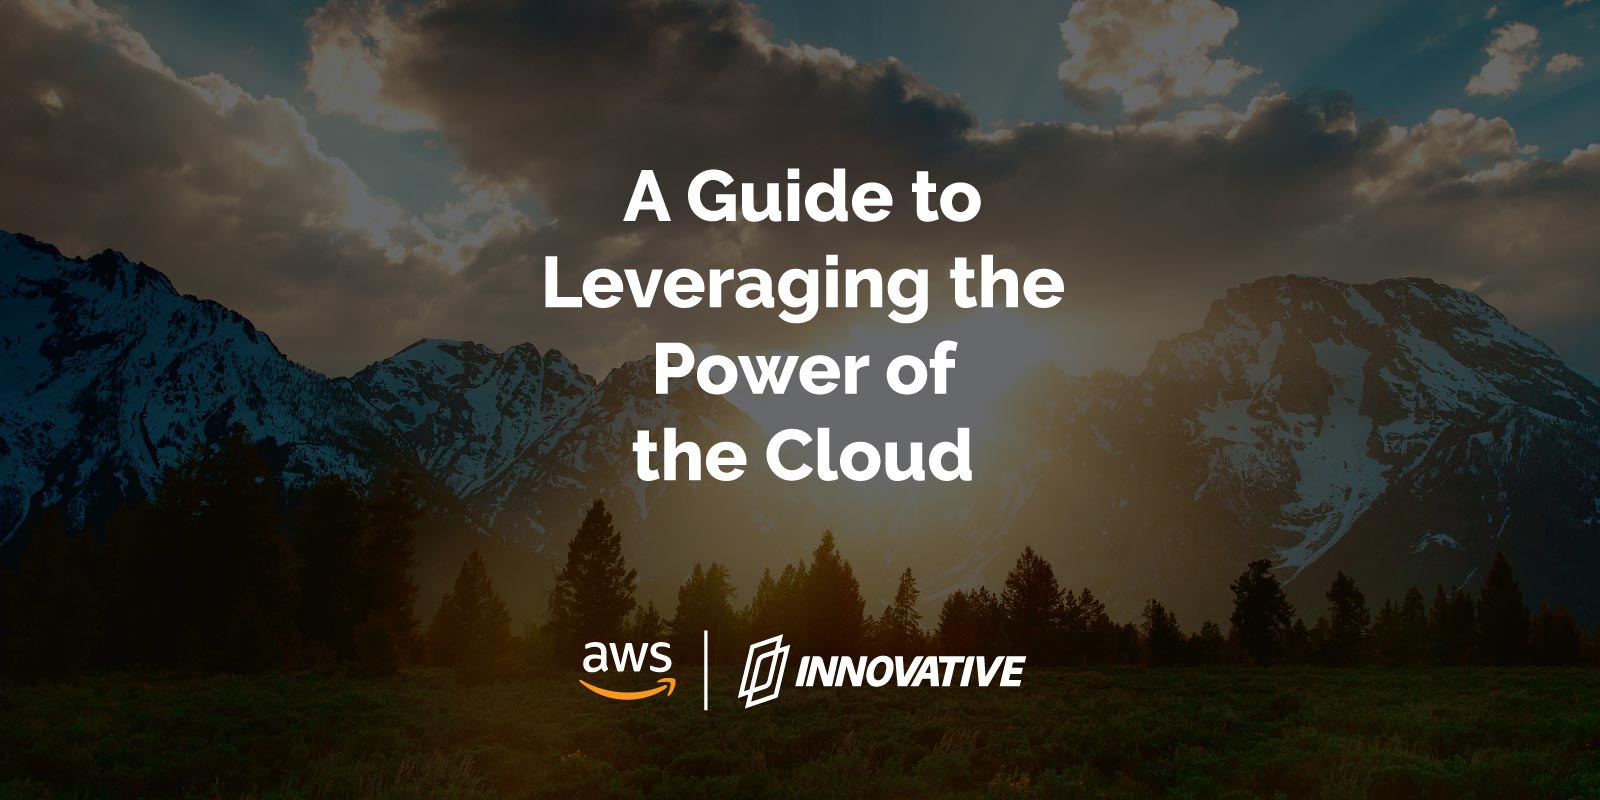 A Guide to Leveraging the Power of the Cloud